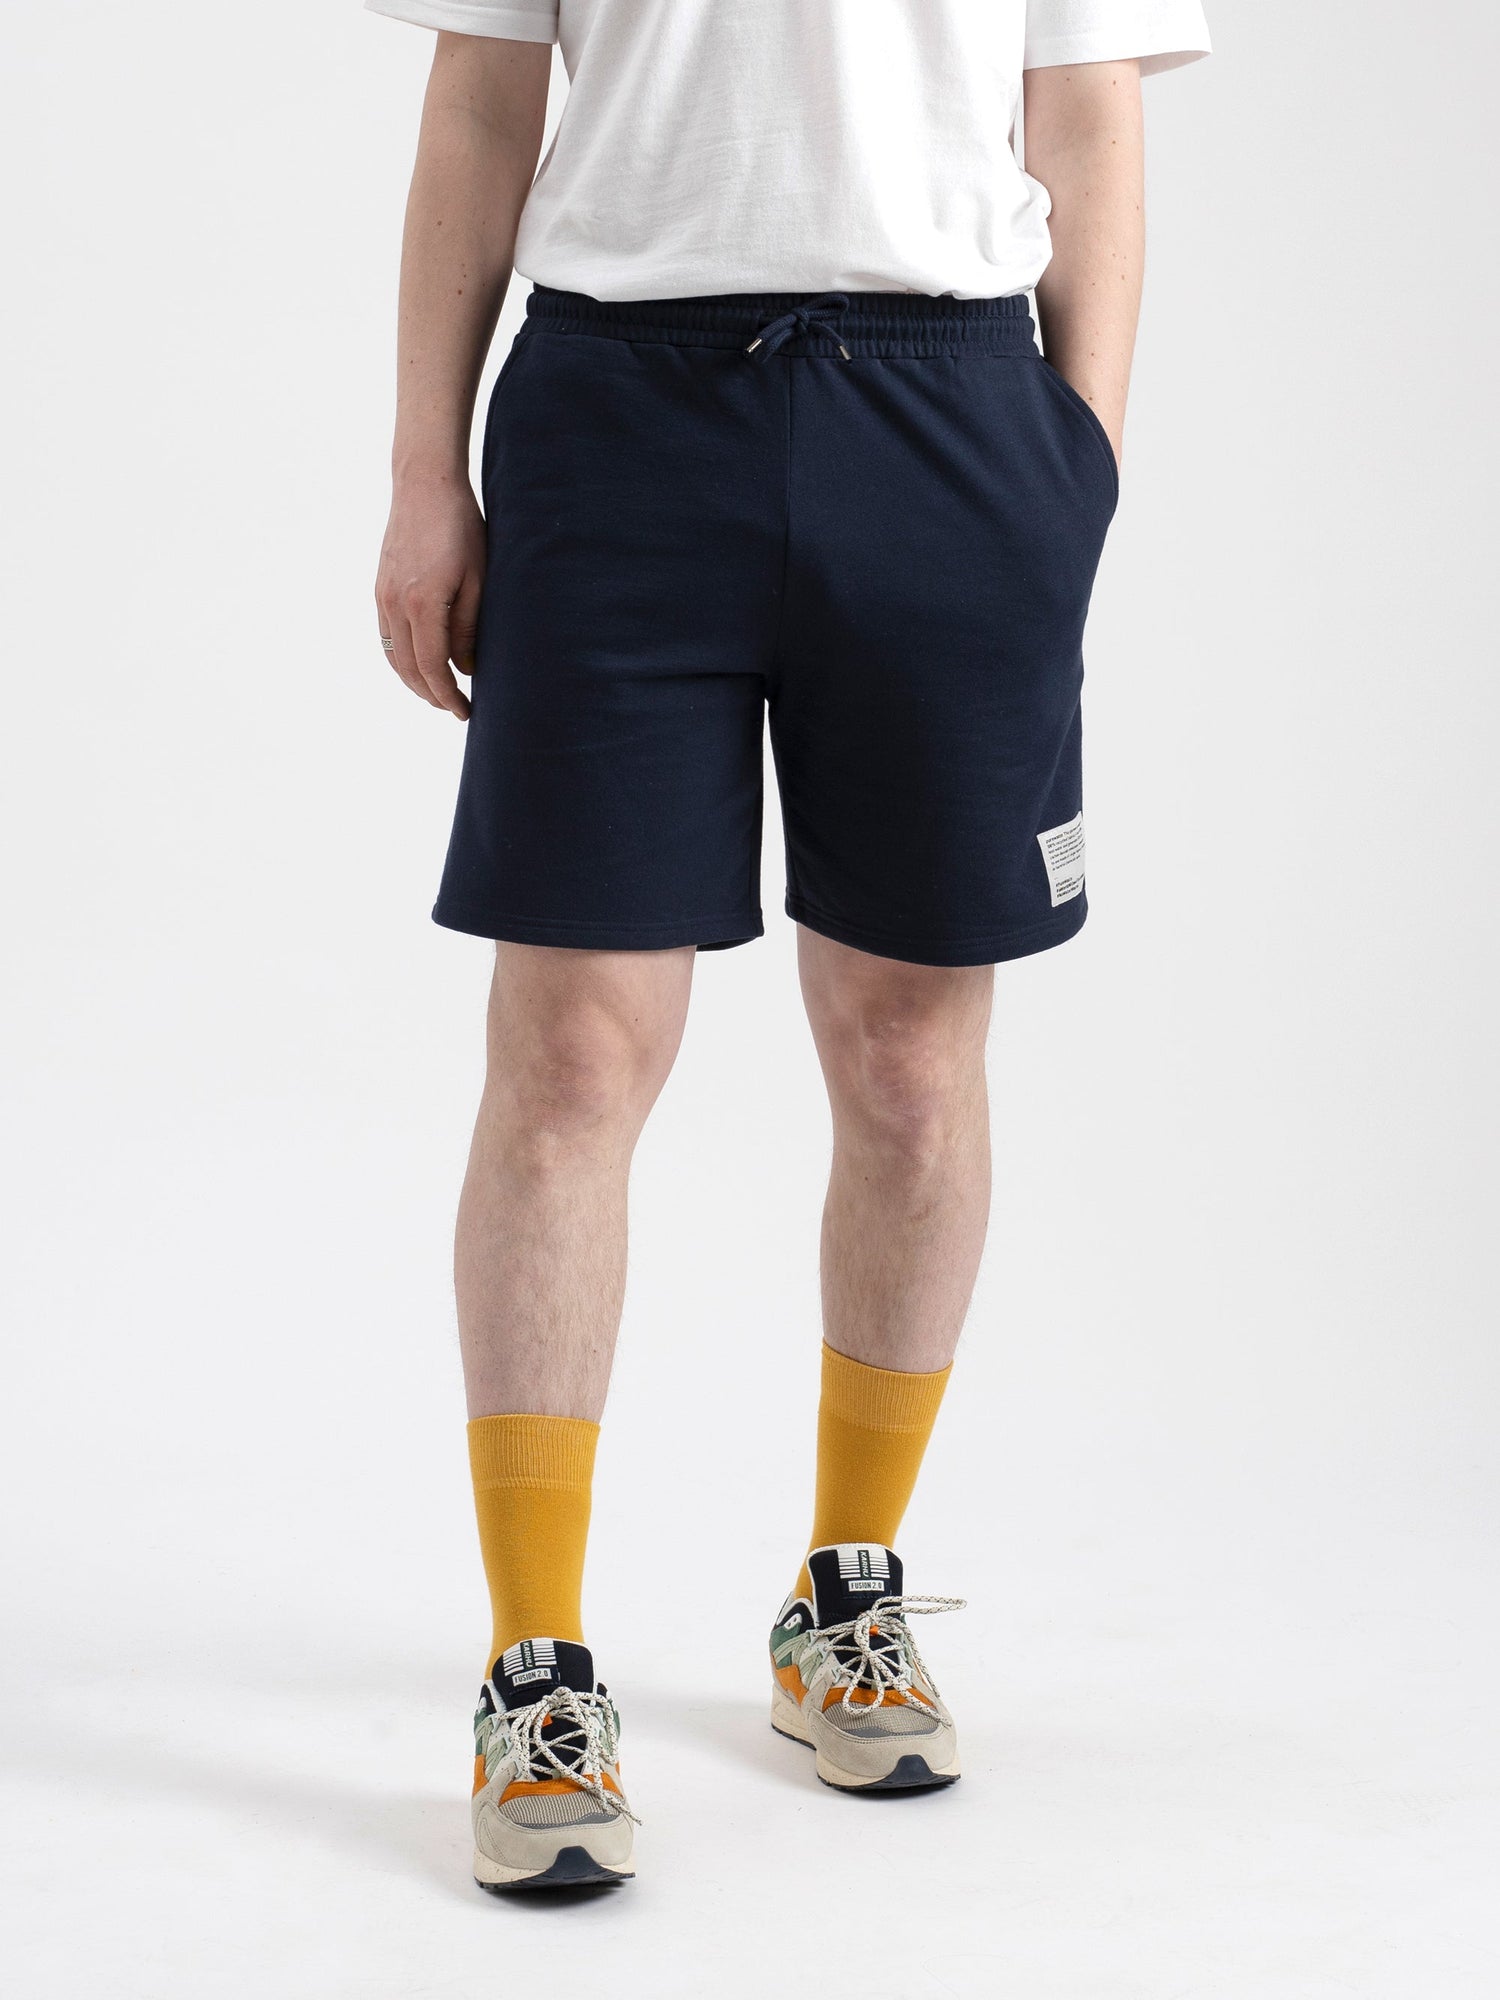 Pure Waste Unisex Loose Fit Sweatshorts - Recycled cotton & Recycled polyester Solid Navy Pants